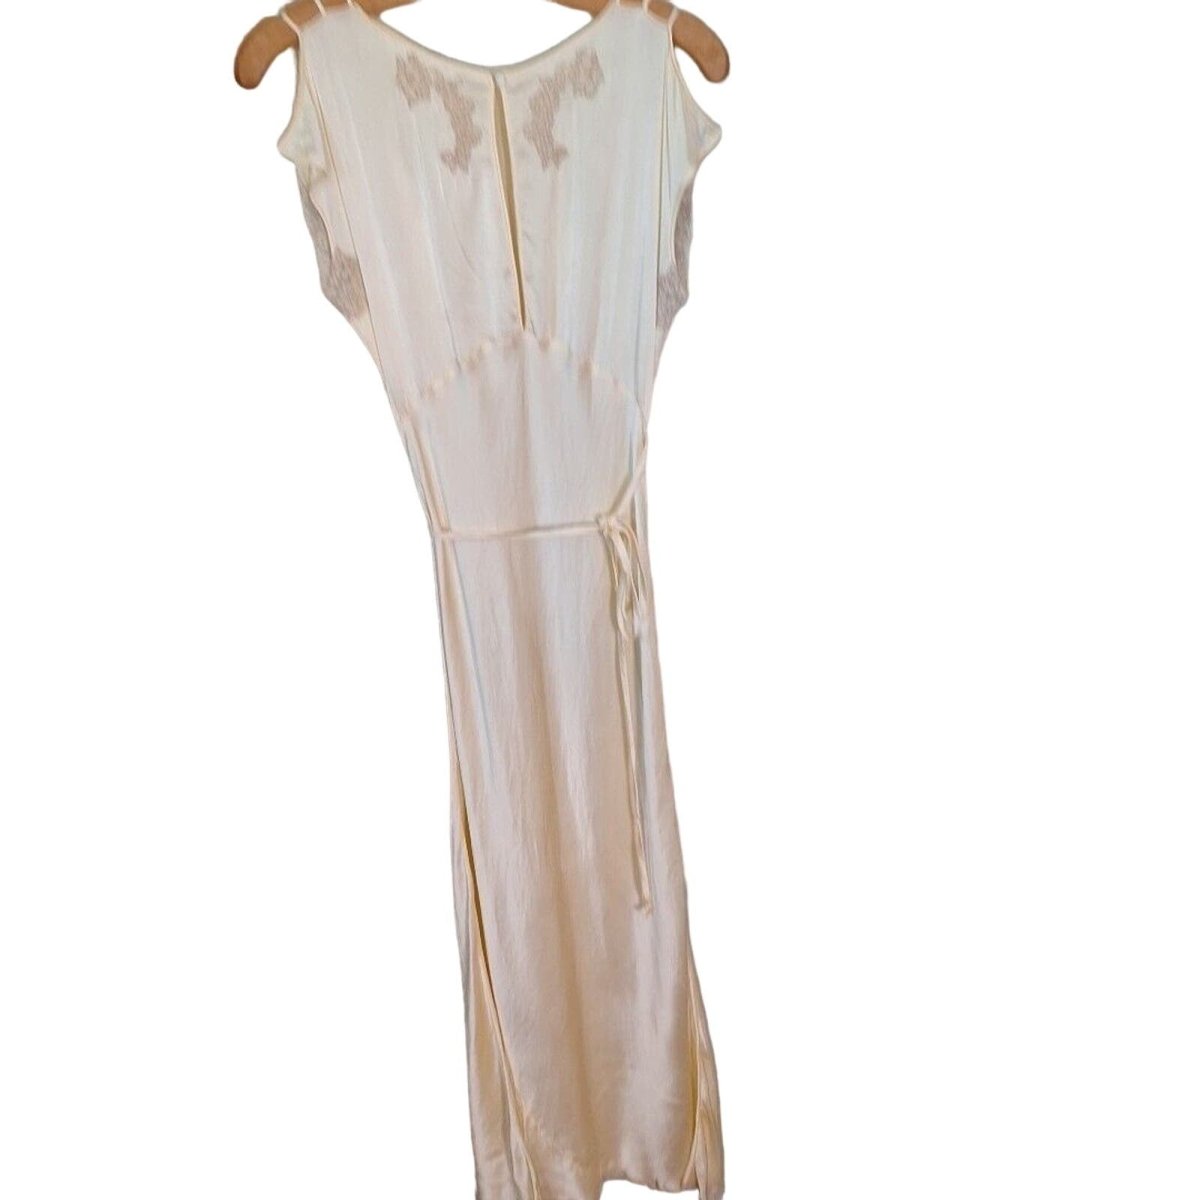 Vintage 30s/40s All Silk Satin Bias Cut Nightgown Slip Dress AS IS Women Size S/M 34/29/40 - themallvintage The Mall Vintage